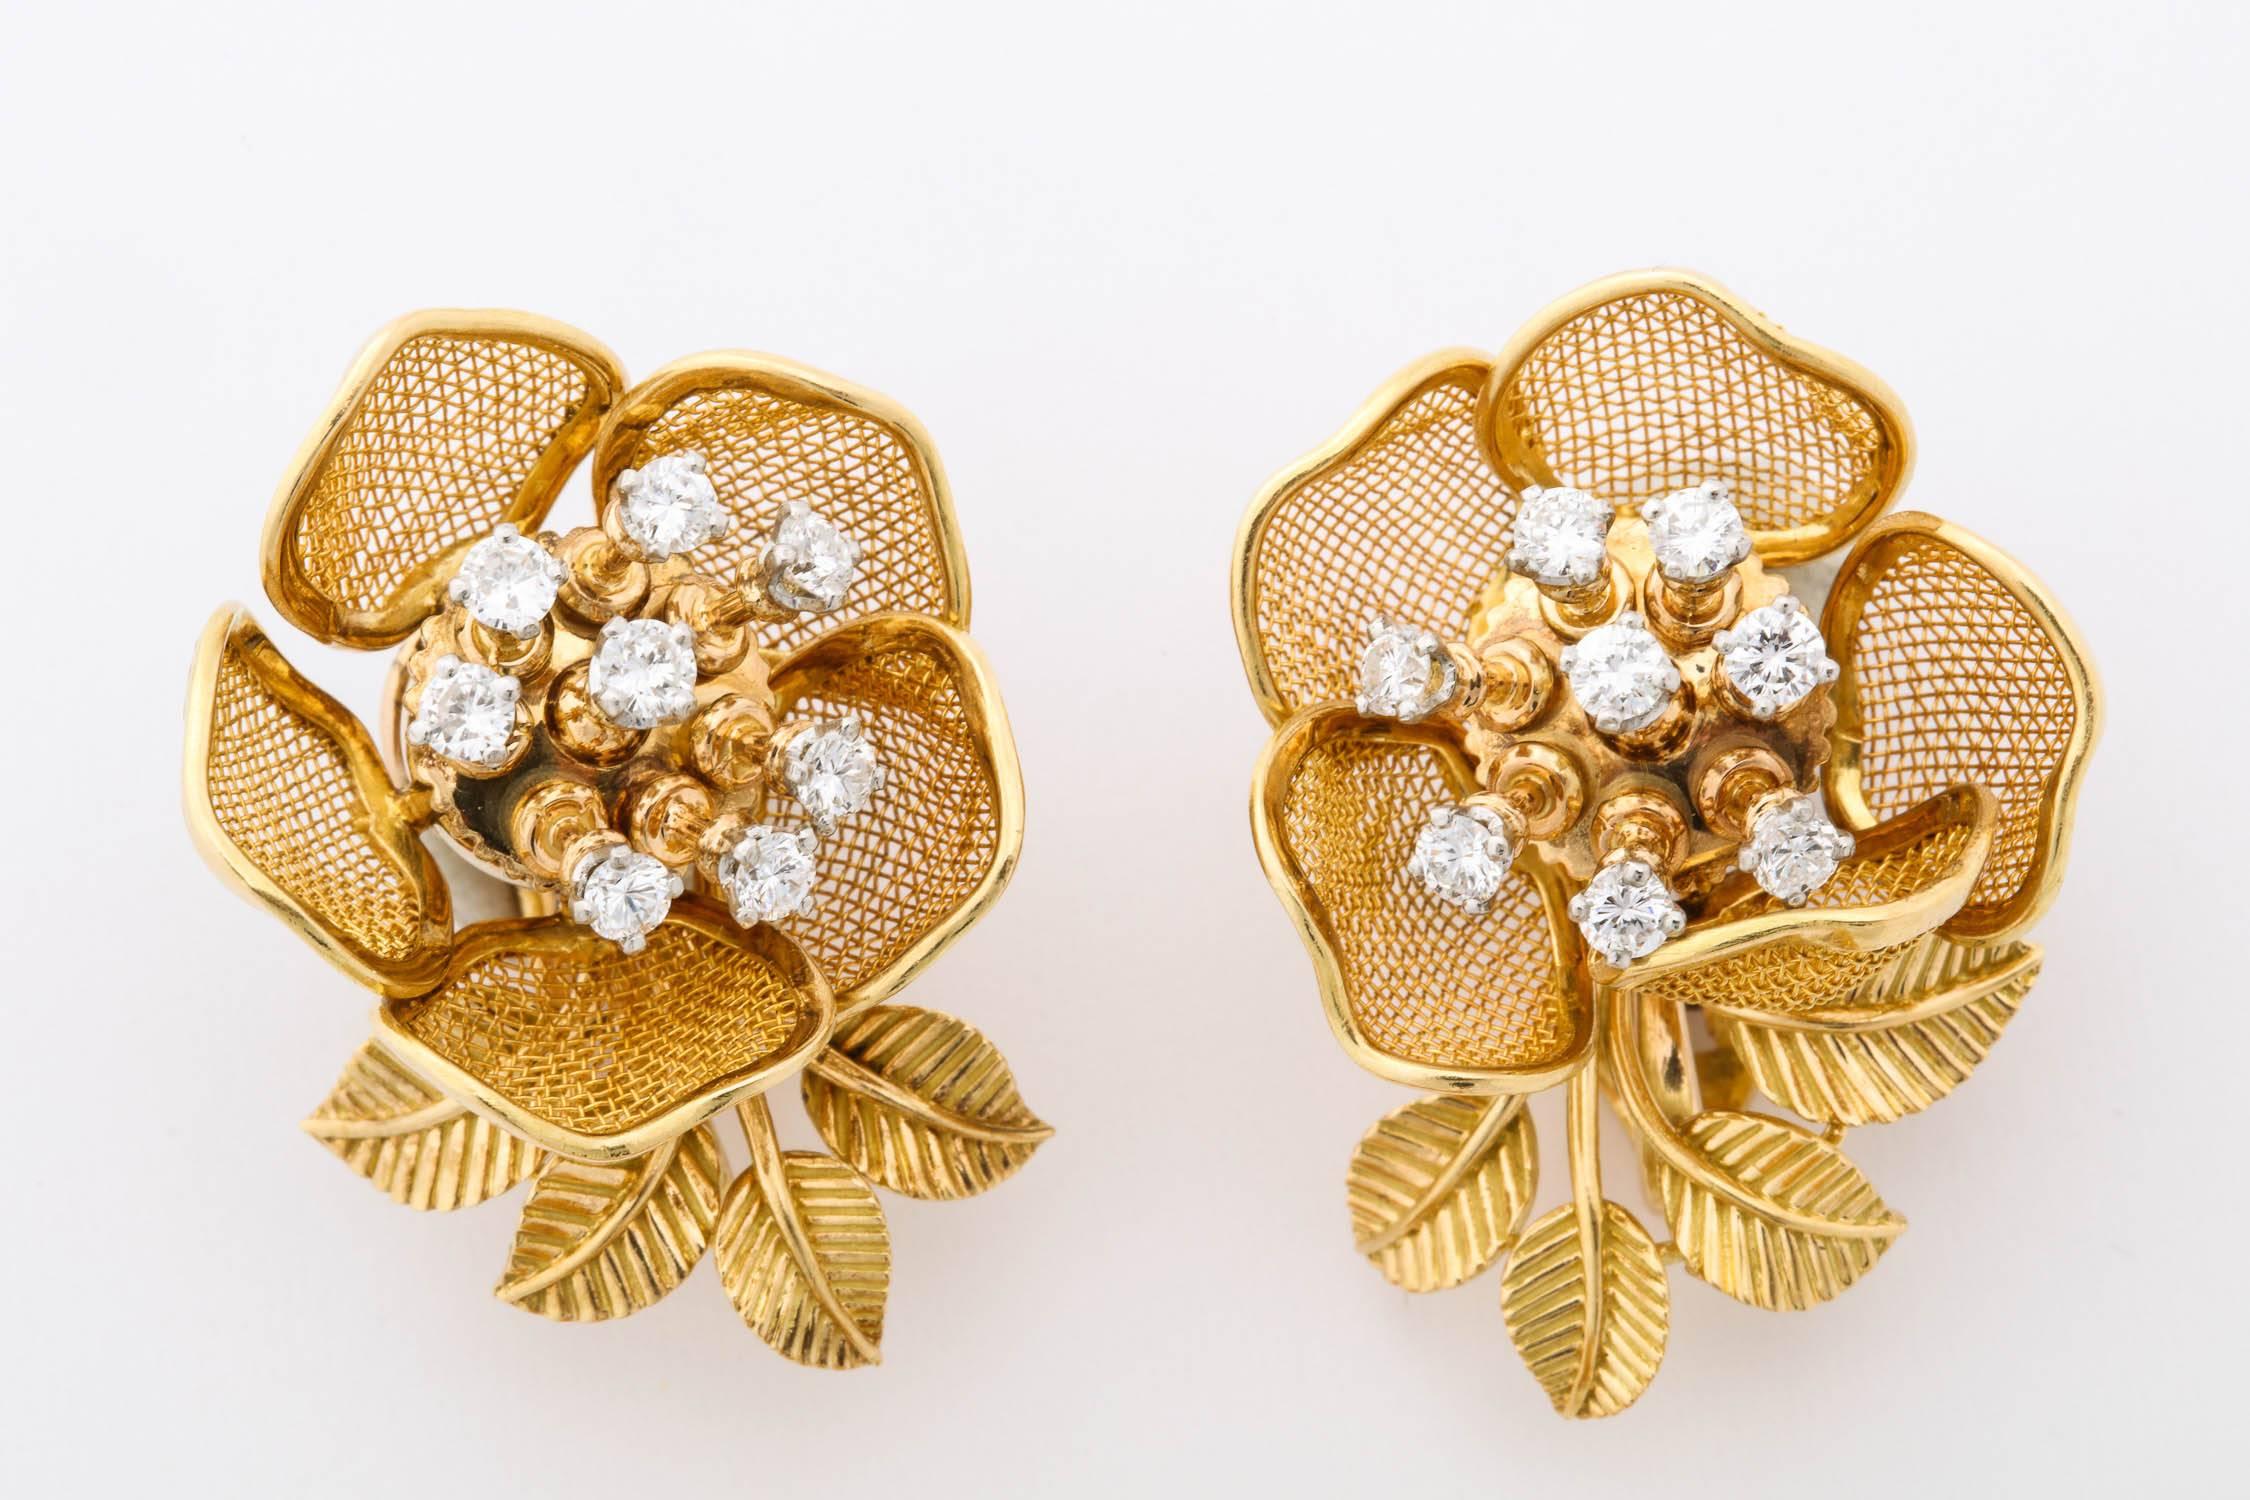 18k yellow gold mesh petals, each petal individually hinged
The brooch features seven movable petals and centers 21  diamonds set in platinum atop gold 